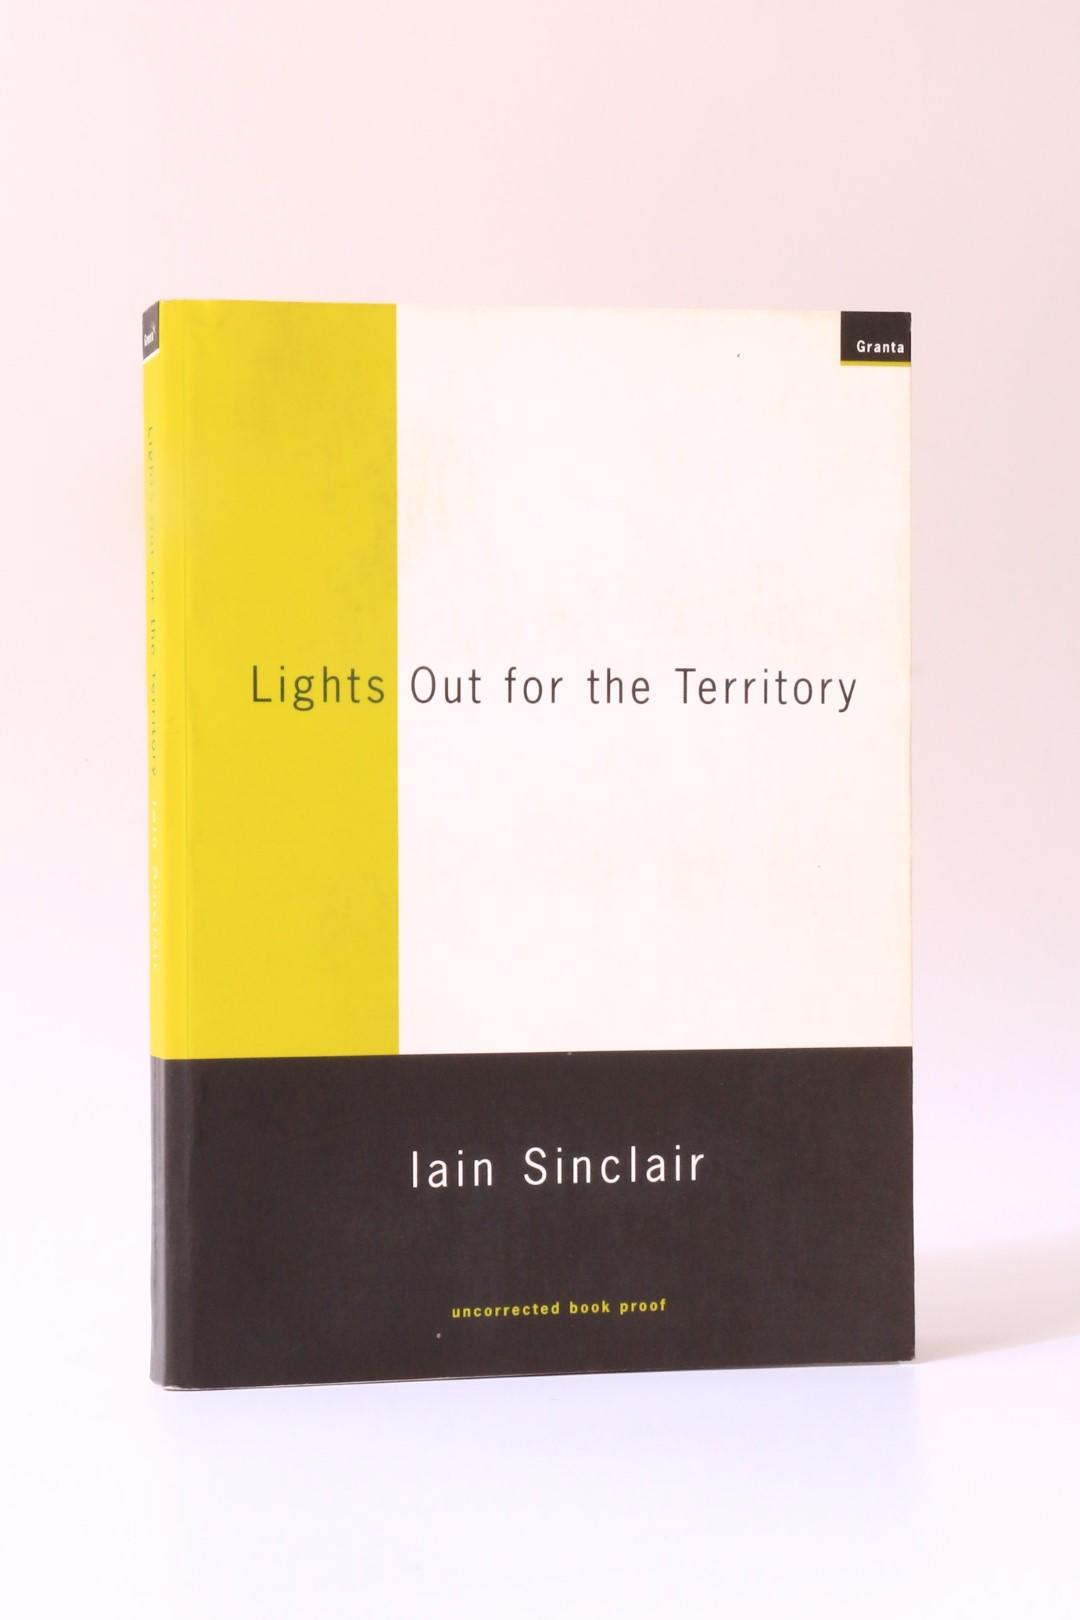 Iain Sinclair - Lights Out for the Territory - Granta, 1997, Proof. Signed